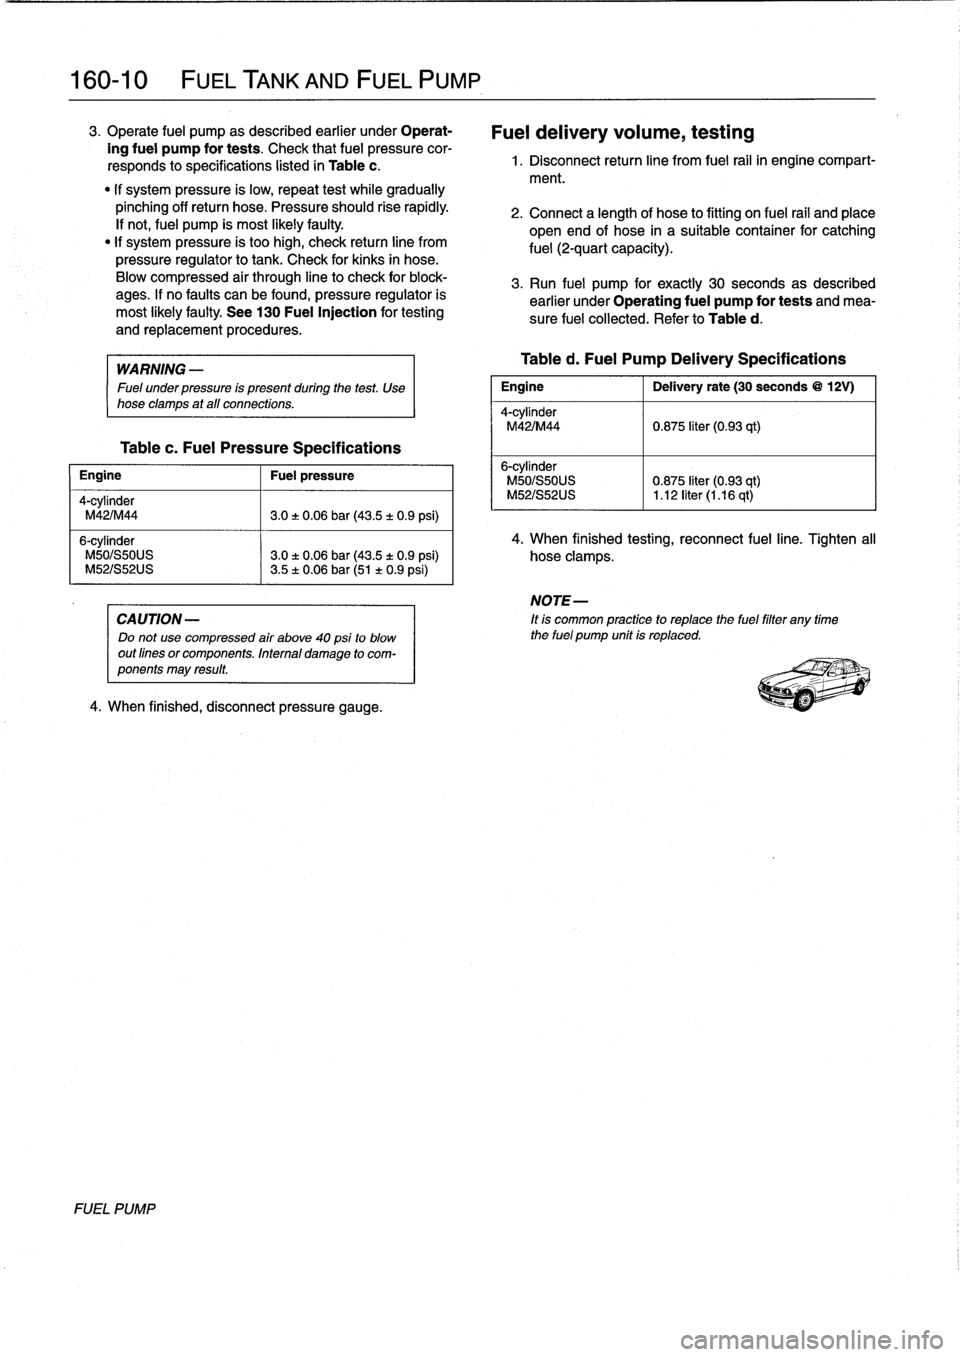 BMW 328i 1993 E36 Owners Guide 
160-
1
0

	

FUEL
TANK
AND
FUEL
PUMP

3
.
Operate
fuel
pump
as
described
earlier
under
Operat-

ing
fuel
pump
for
tests
.
Check
that
fuel
pressure
cor-

responds
to
specifications
listed
in
Table
c
.